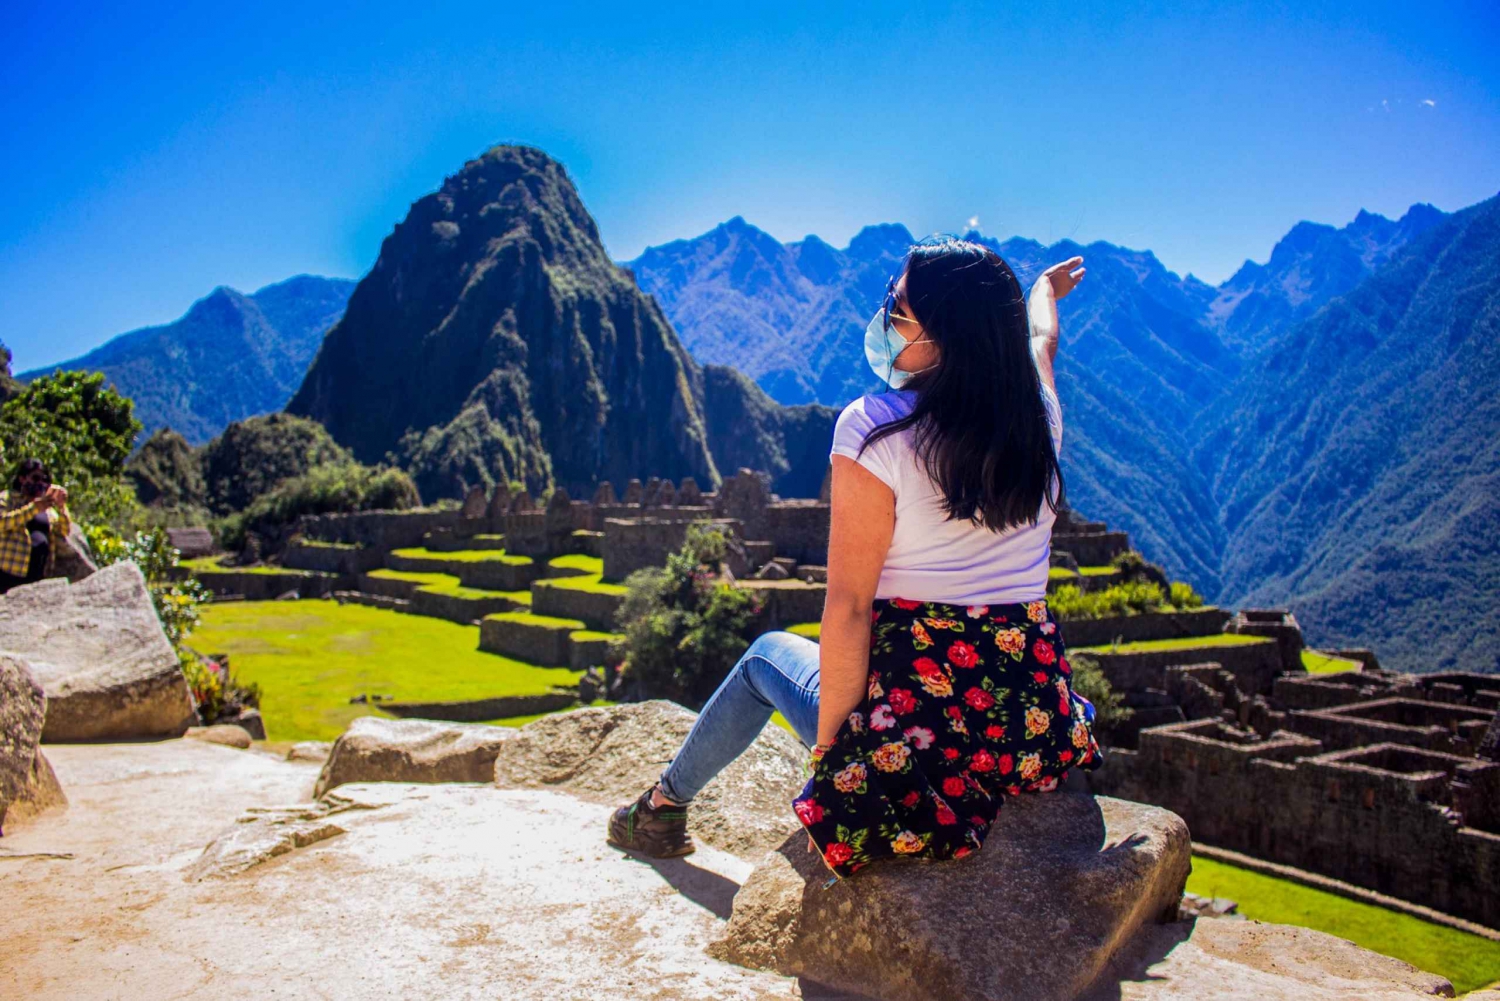 From Cusco: 2 Day Bus Tour to Machu Picchu